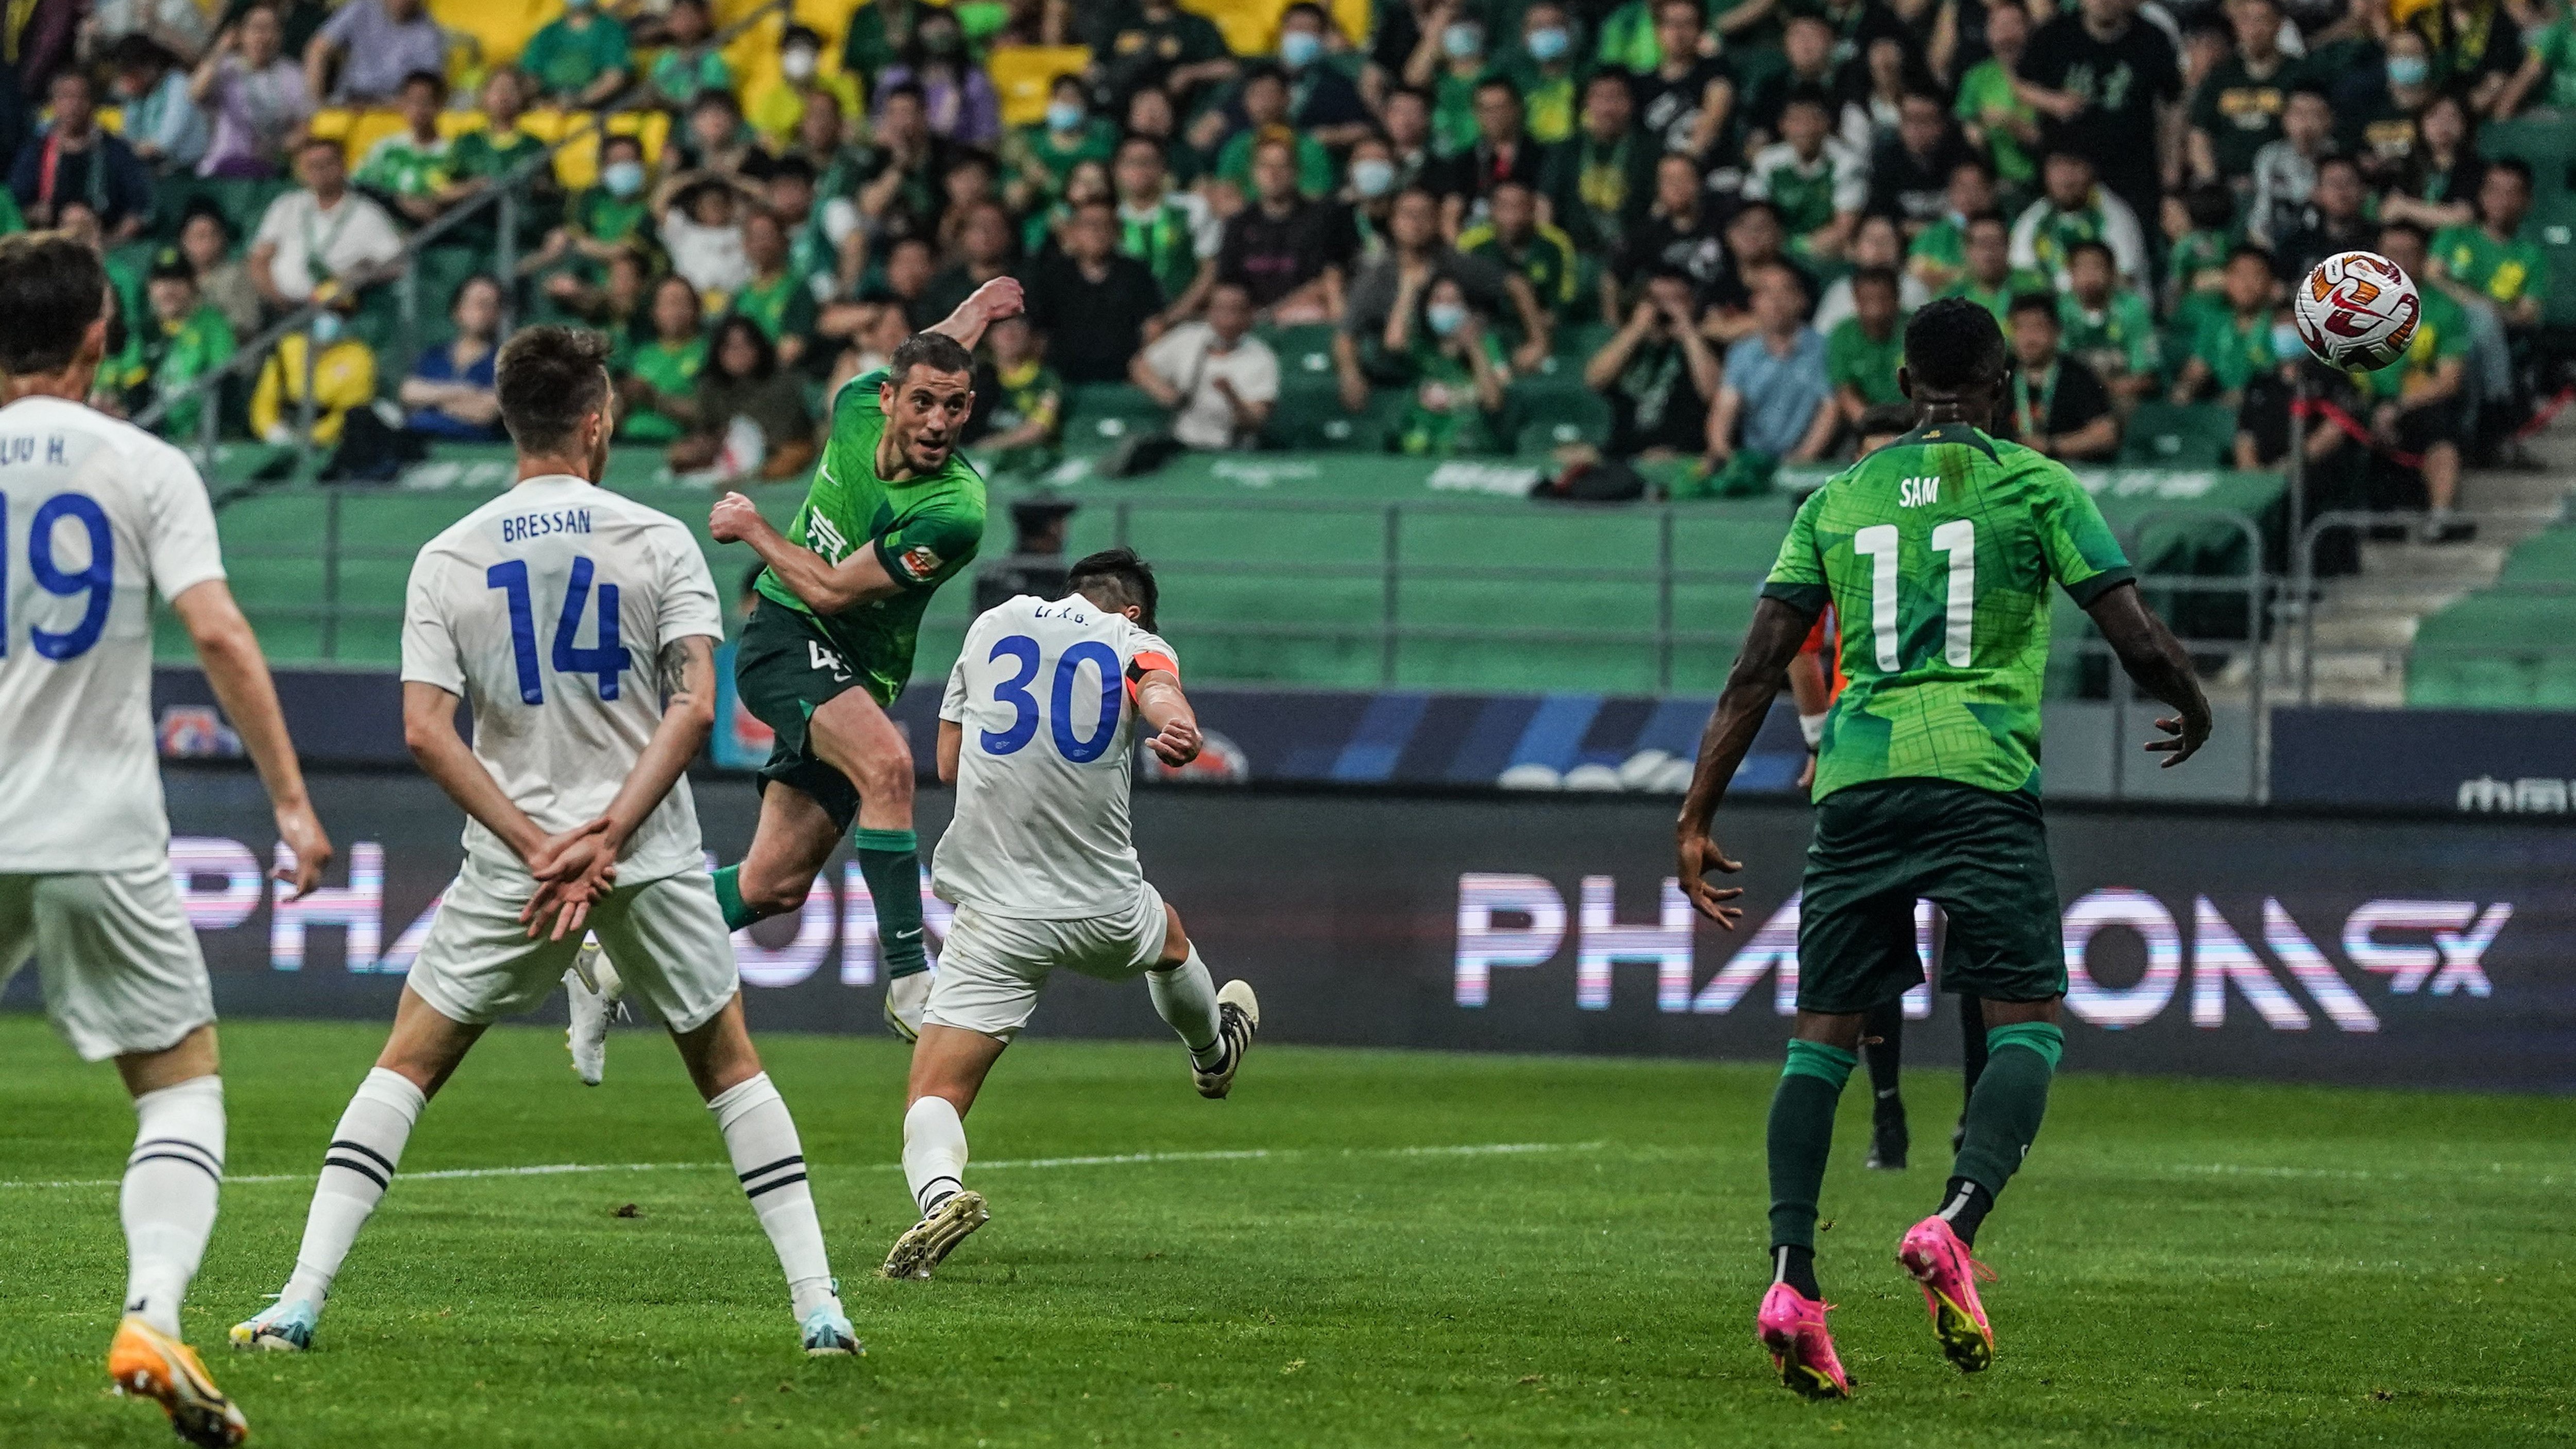 Beijing Guoan's Arijan Ademi unleashes a match-winning shot during their Chinese Super League clash with Nantong Zhiyun at the new Workers' Stadium in Beijing, China, May 15, 2023. /Beijing Guoan